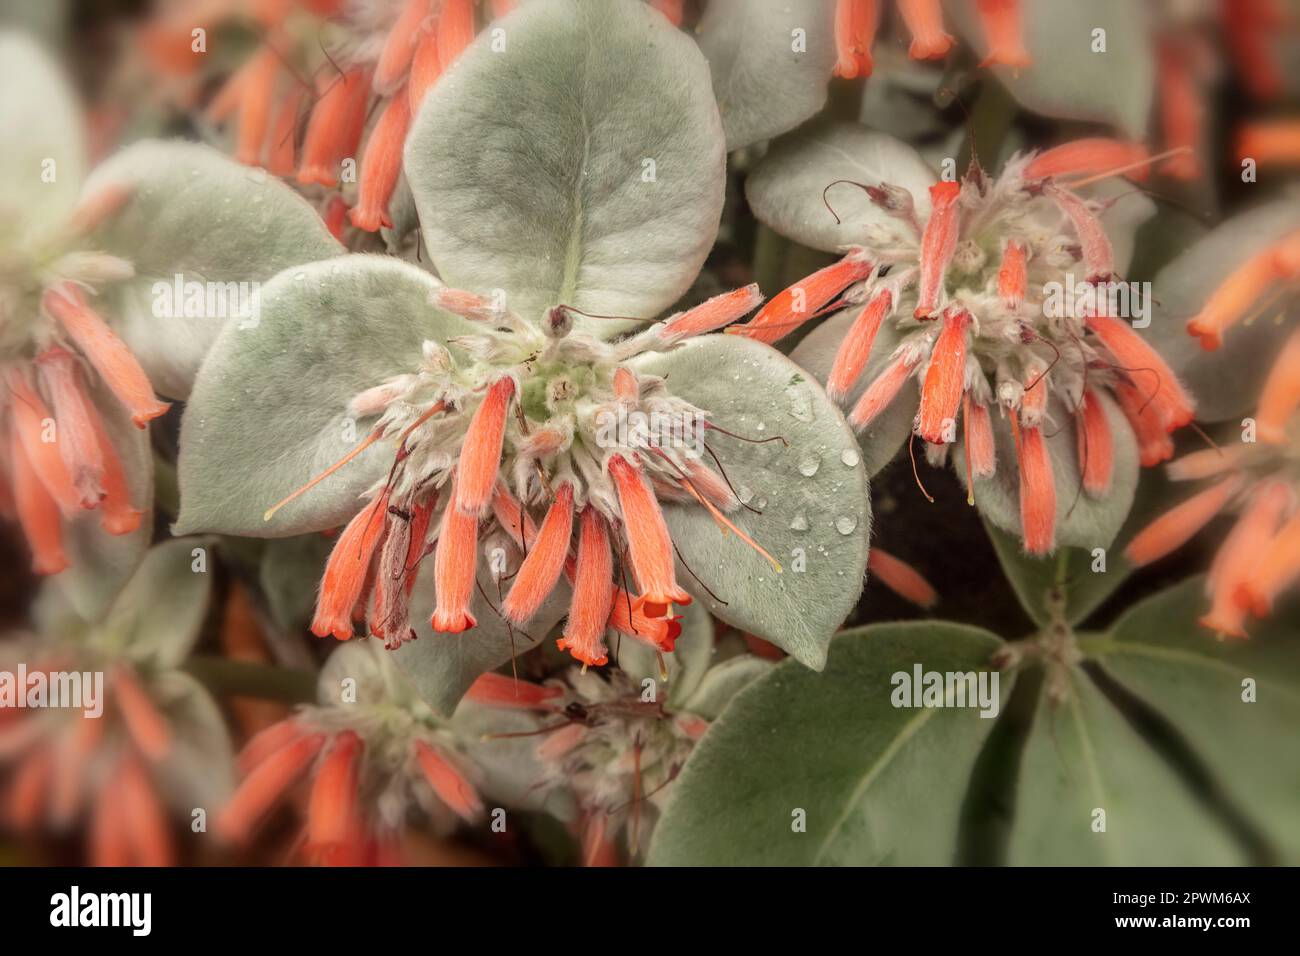 Natural close up plant portrait of interesting Sinningia canescens, Brazilian Edelweiss, in flower Stock Photo